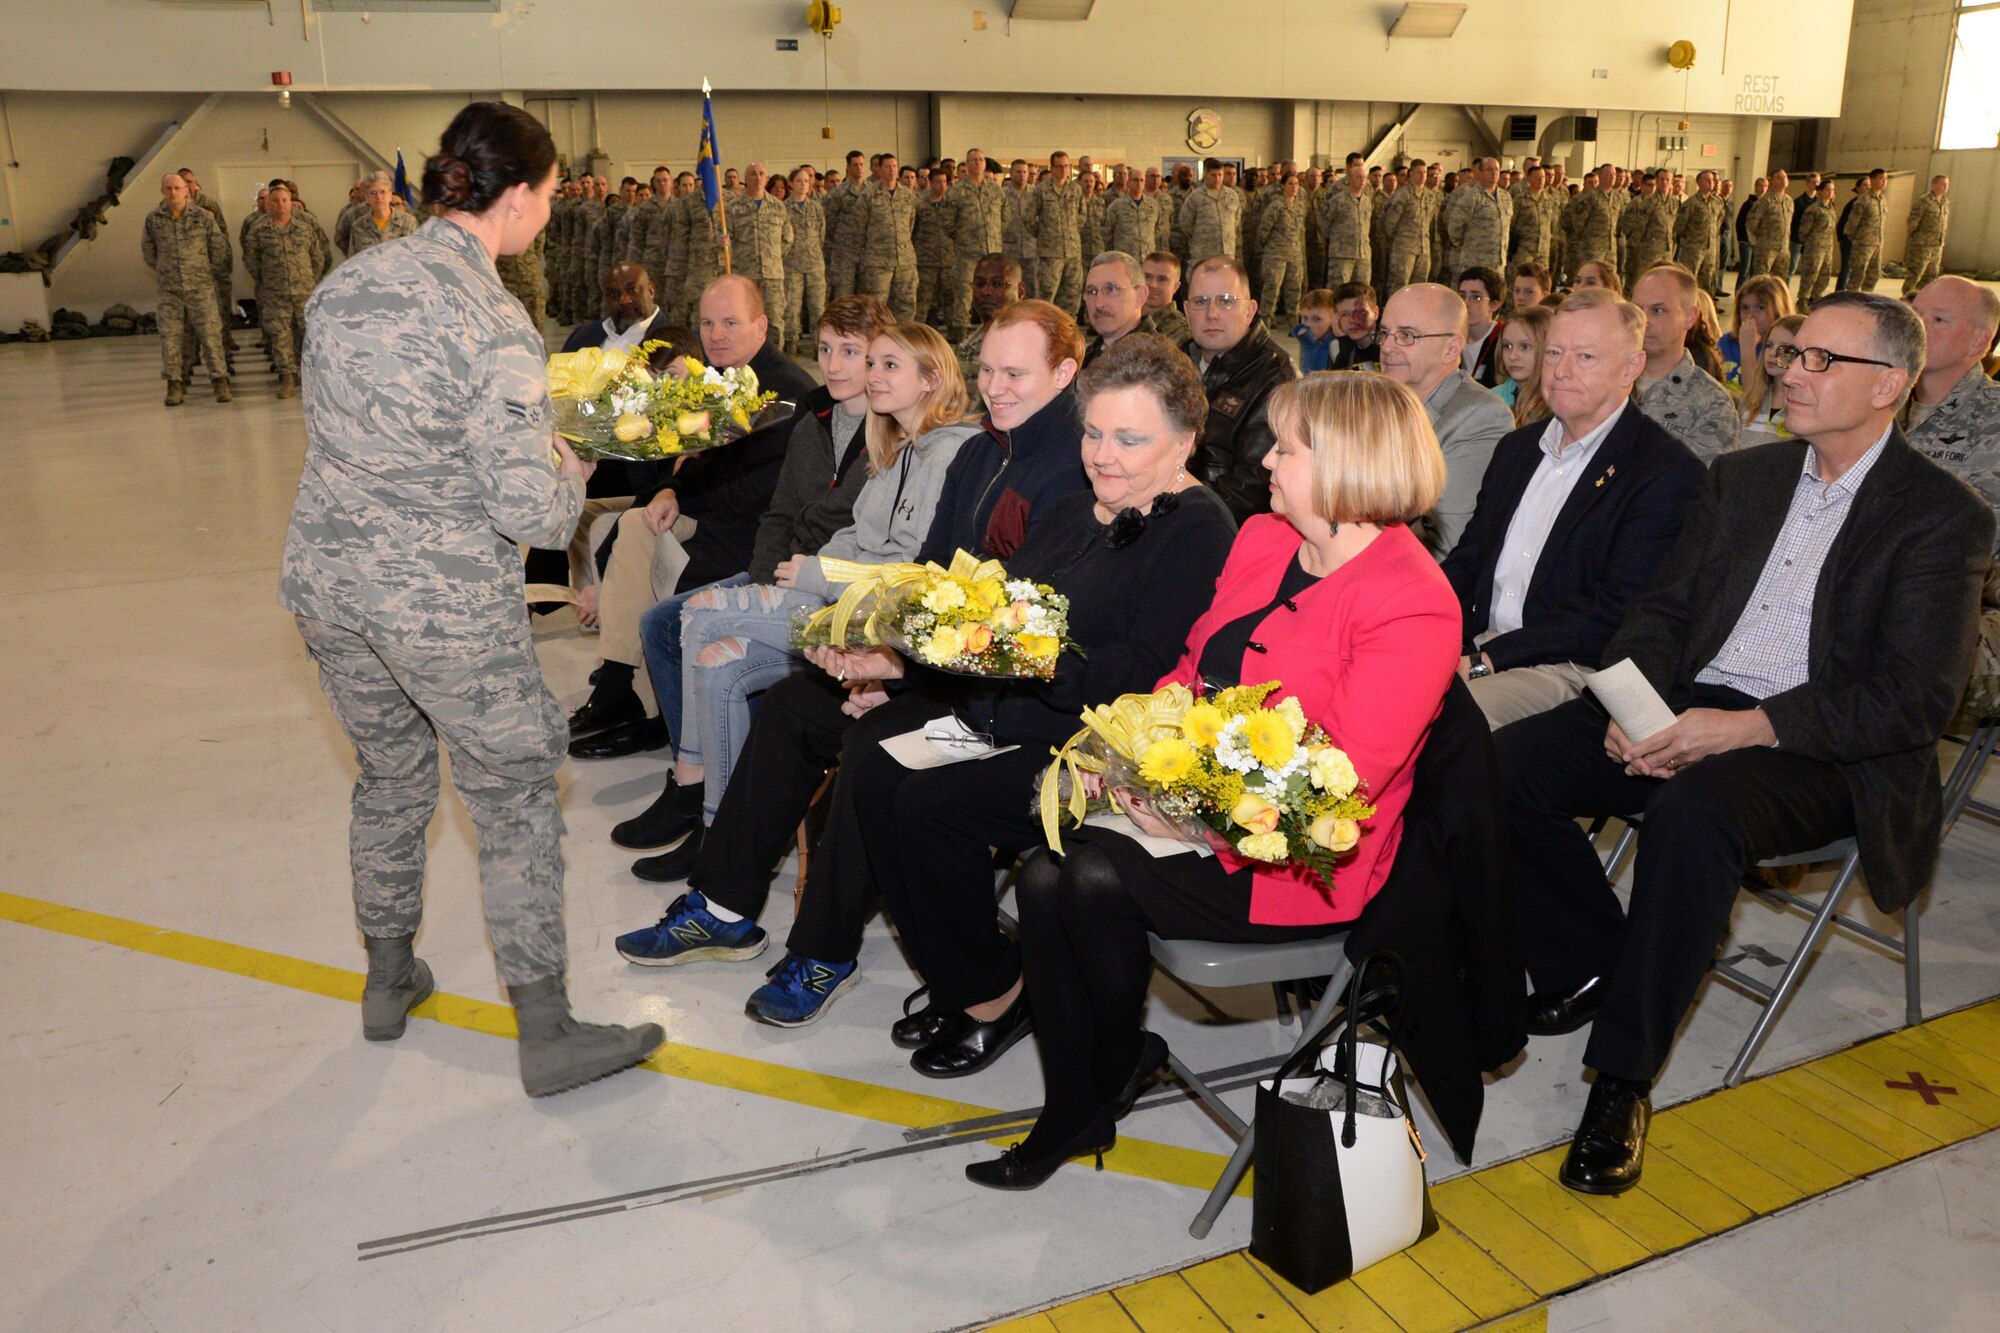 Family members of U.S. Air Force Col. Chris Alderdice receive flowers during an assumption of command ceremony Feb. 5, 2017, Hulman Field Air National Guard base, Terre Haute, Ind.. Col. Alderdice assumed command of the 181st Intelligence Wing. (U.S. Air National Guard photo by Senior Airman Lonnie Wiram)